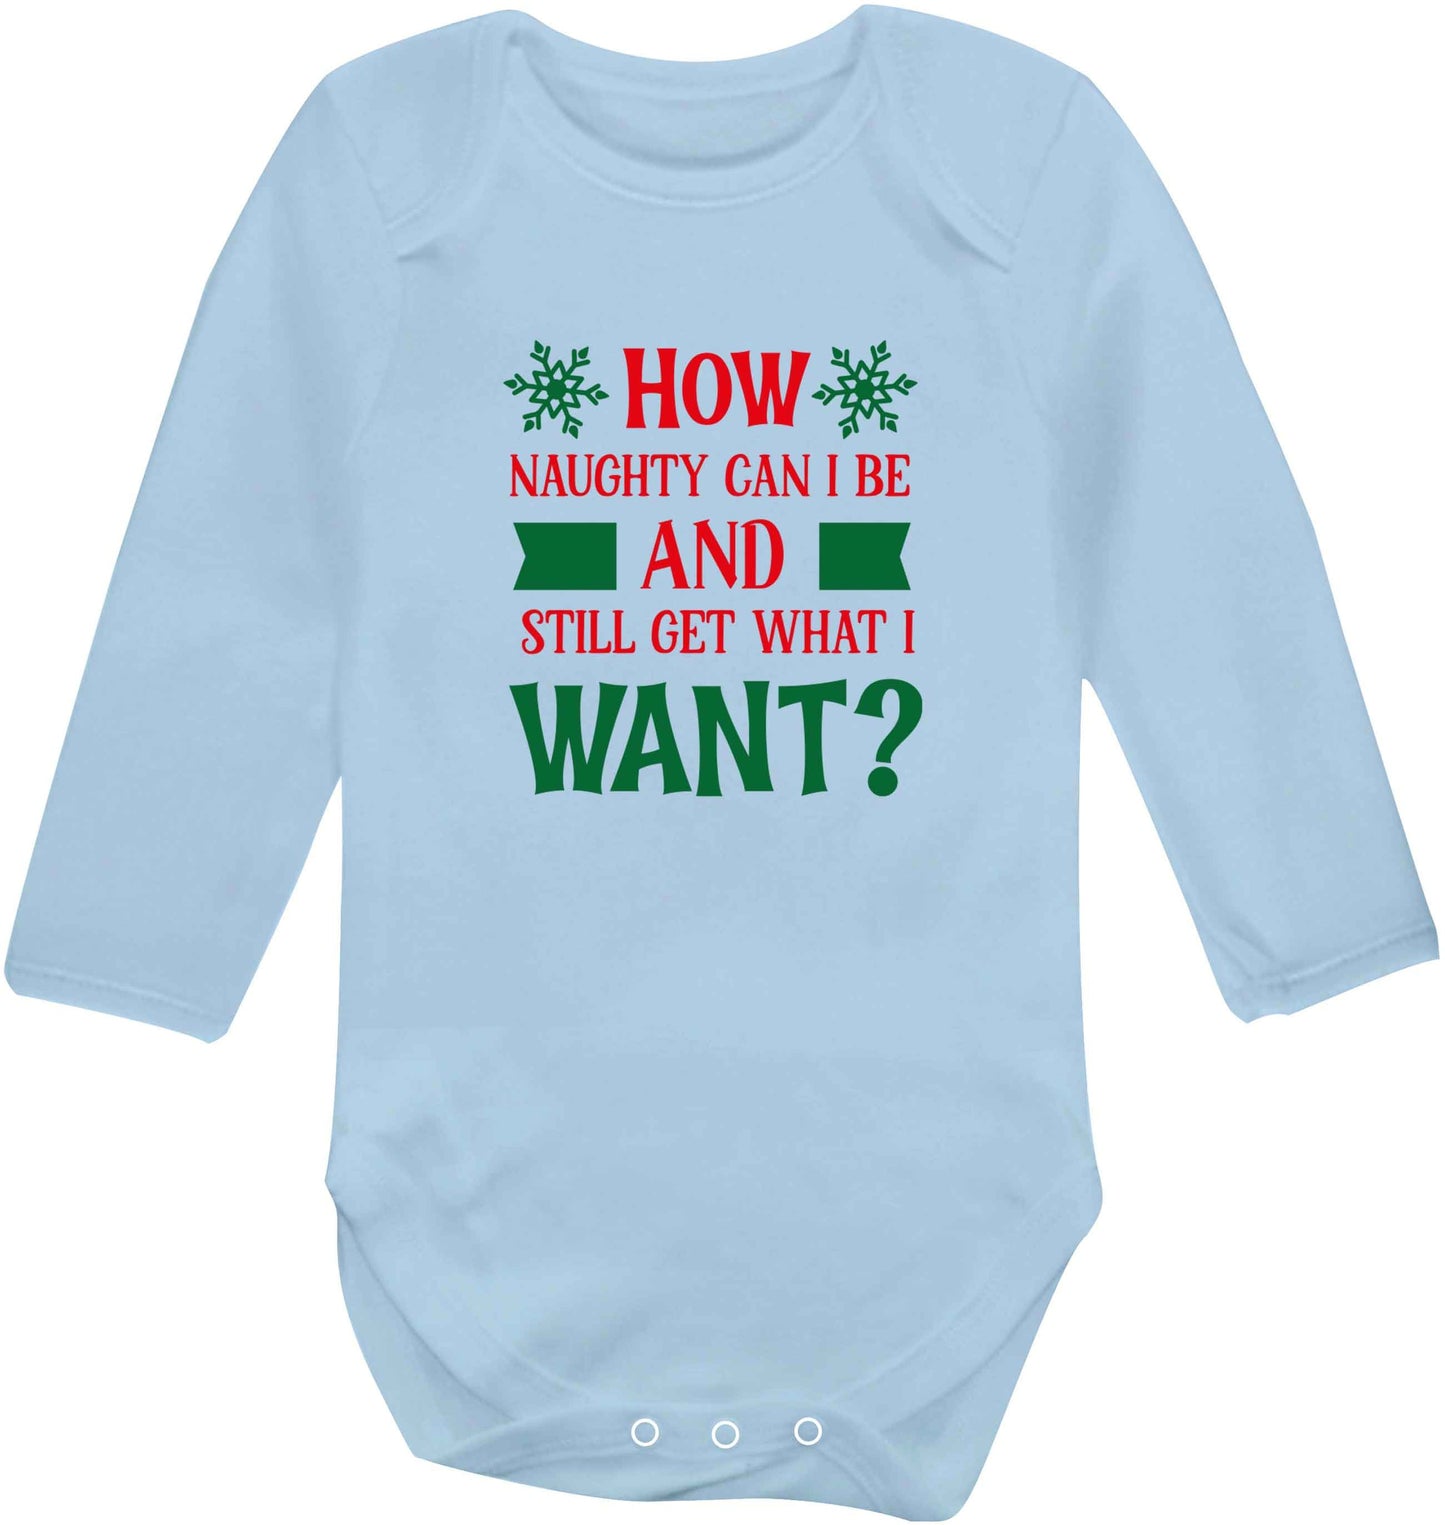 How naughty can I be and still get what I want? baby vest long sleeved pale blue 6-12 months